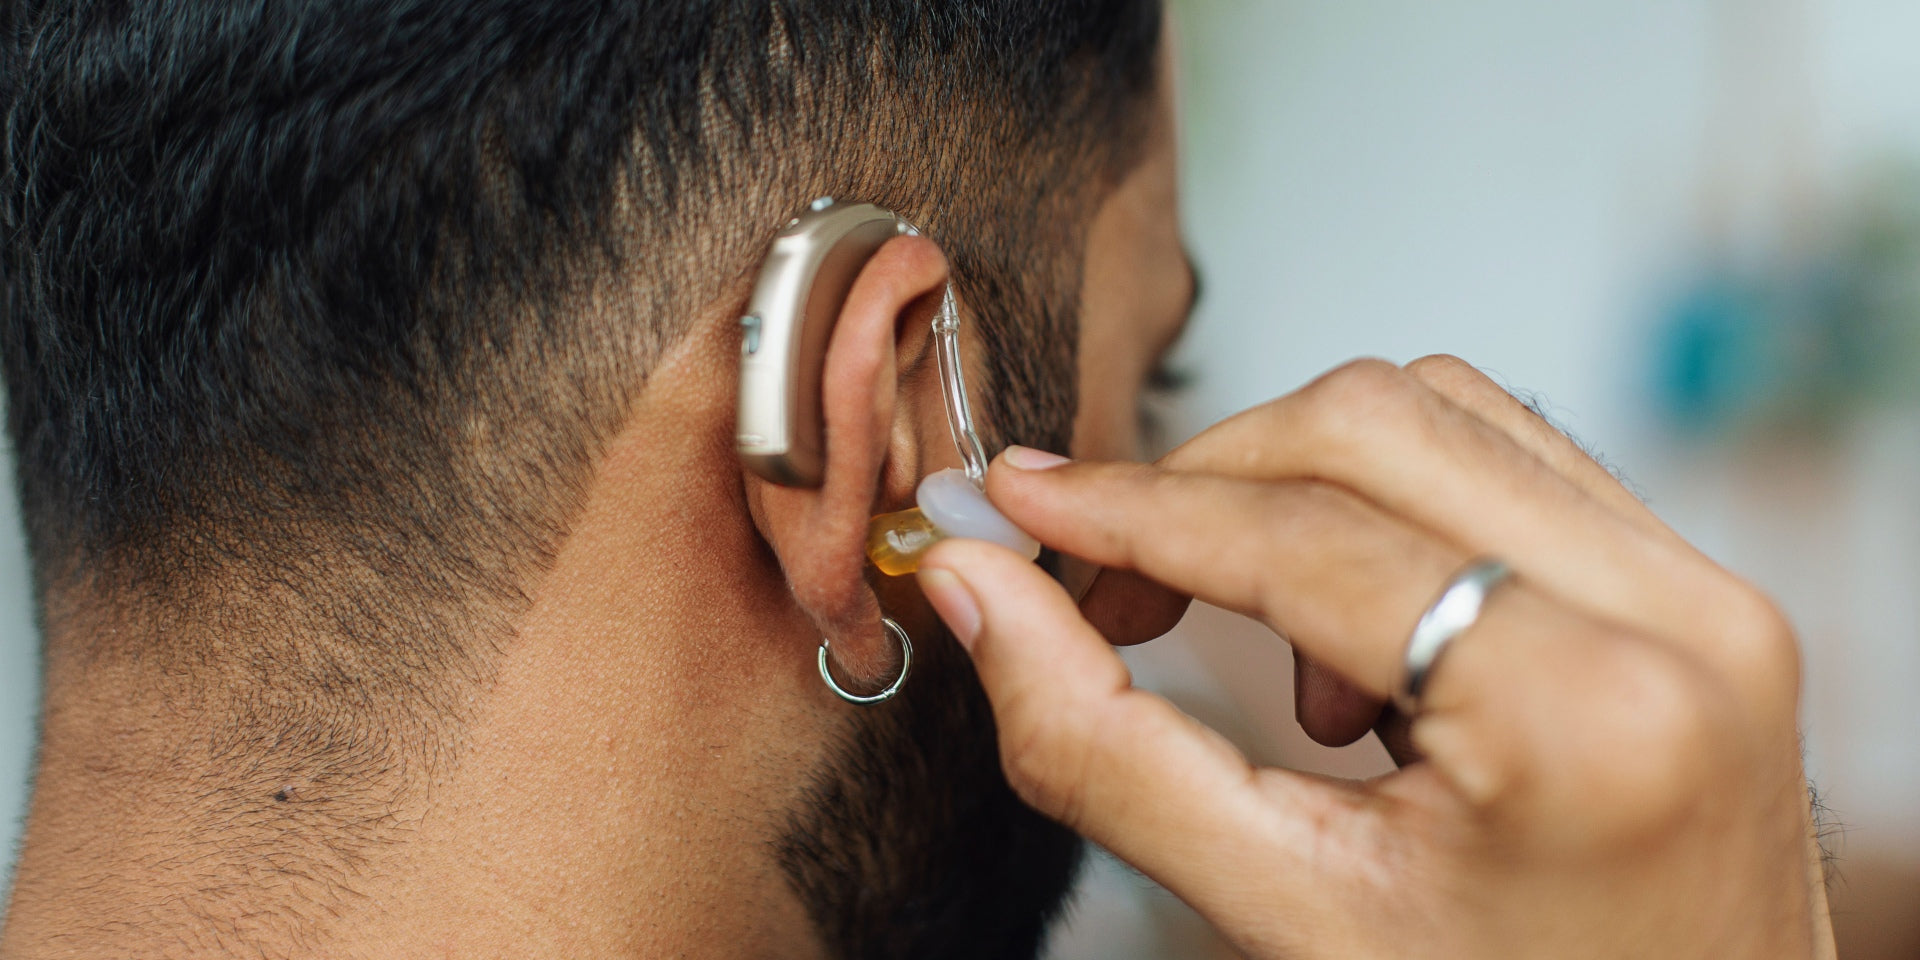 Man confidently inserting a hearing aid.